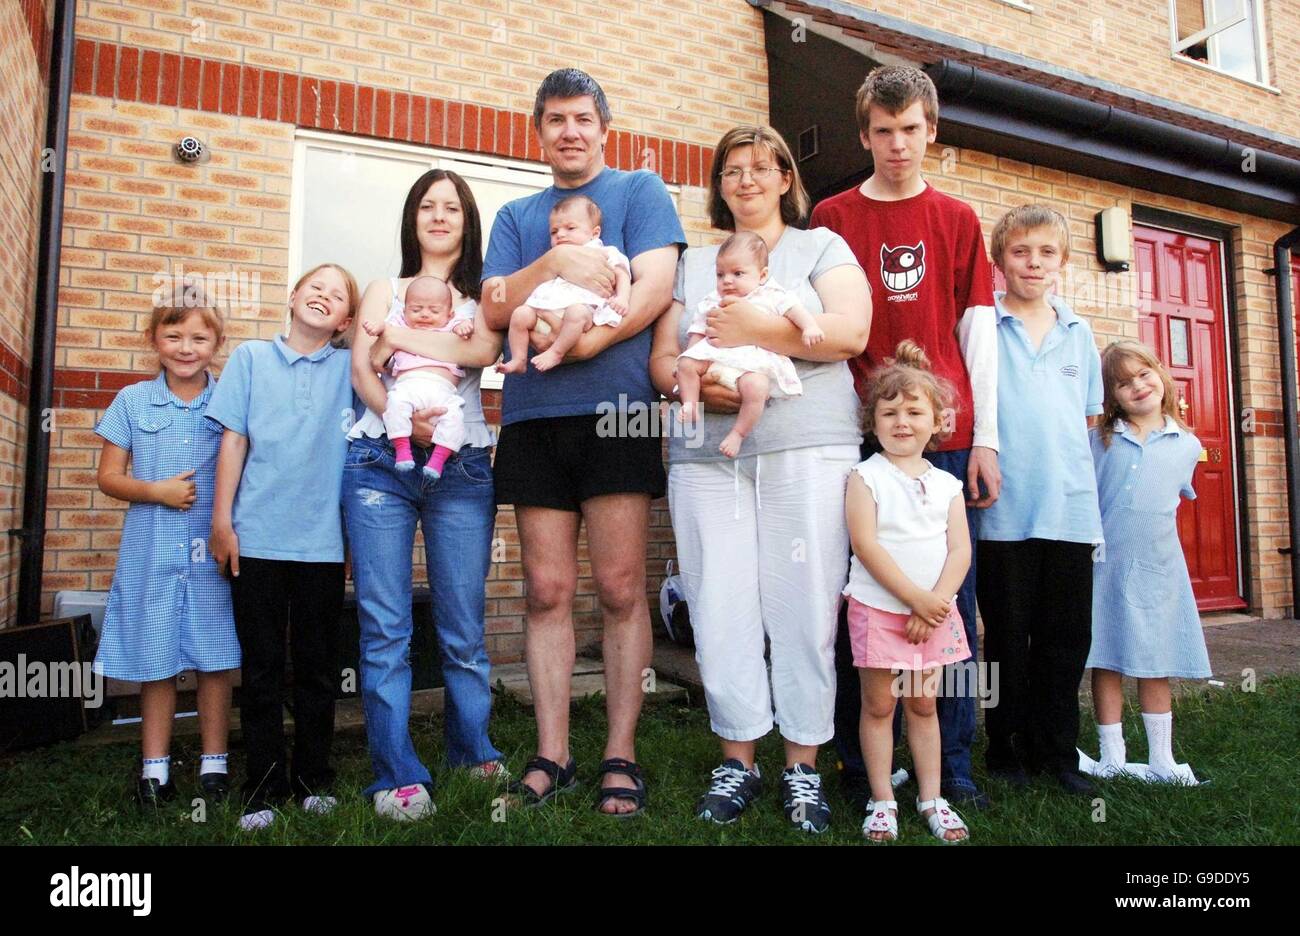 (Left to right) Charlotte Lee aged, 6, Cassandra Bentley, 10, Becky Bentley, 19, Tamsin Bentley, 10 weeks, Robert Bentley, 47, holding Chloe Bentley, 8 weeks, Nichola Bentley, 29, holding Jessika Bentley, 8 weeks, Ross Bentley, 15, Katie Lee, 3, David Bentley, 12, Maddison Bentley, 5. Unemployed Robert Bentley claims his dream of living together as one big happy family in their modest home in Bradley Stoke, Bristol, quickly turned into a nightmare and is blaming the local council for the breakdown of his marriage. Stock Photo